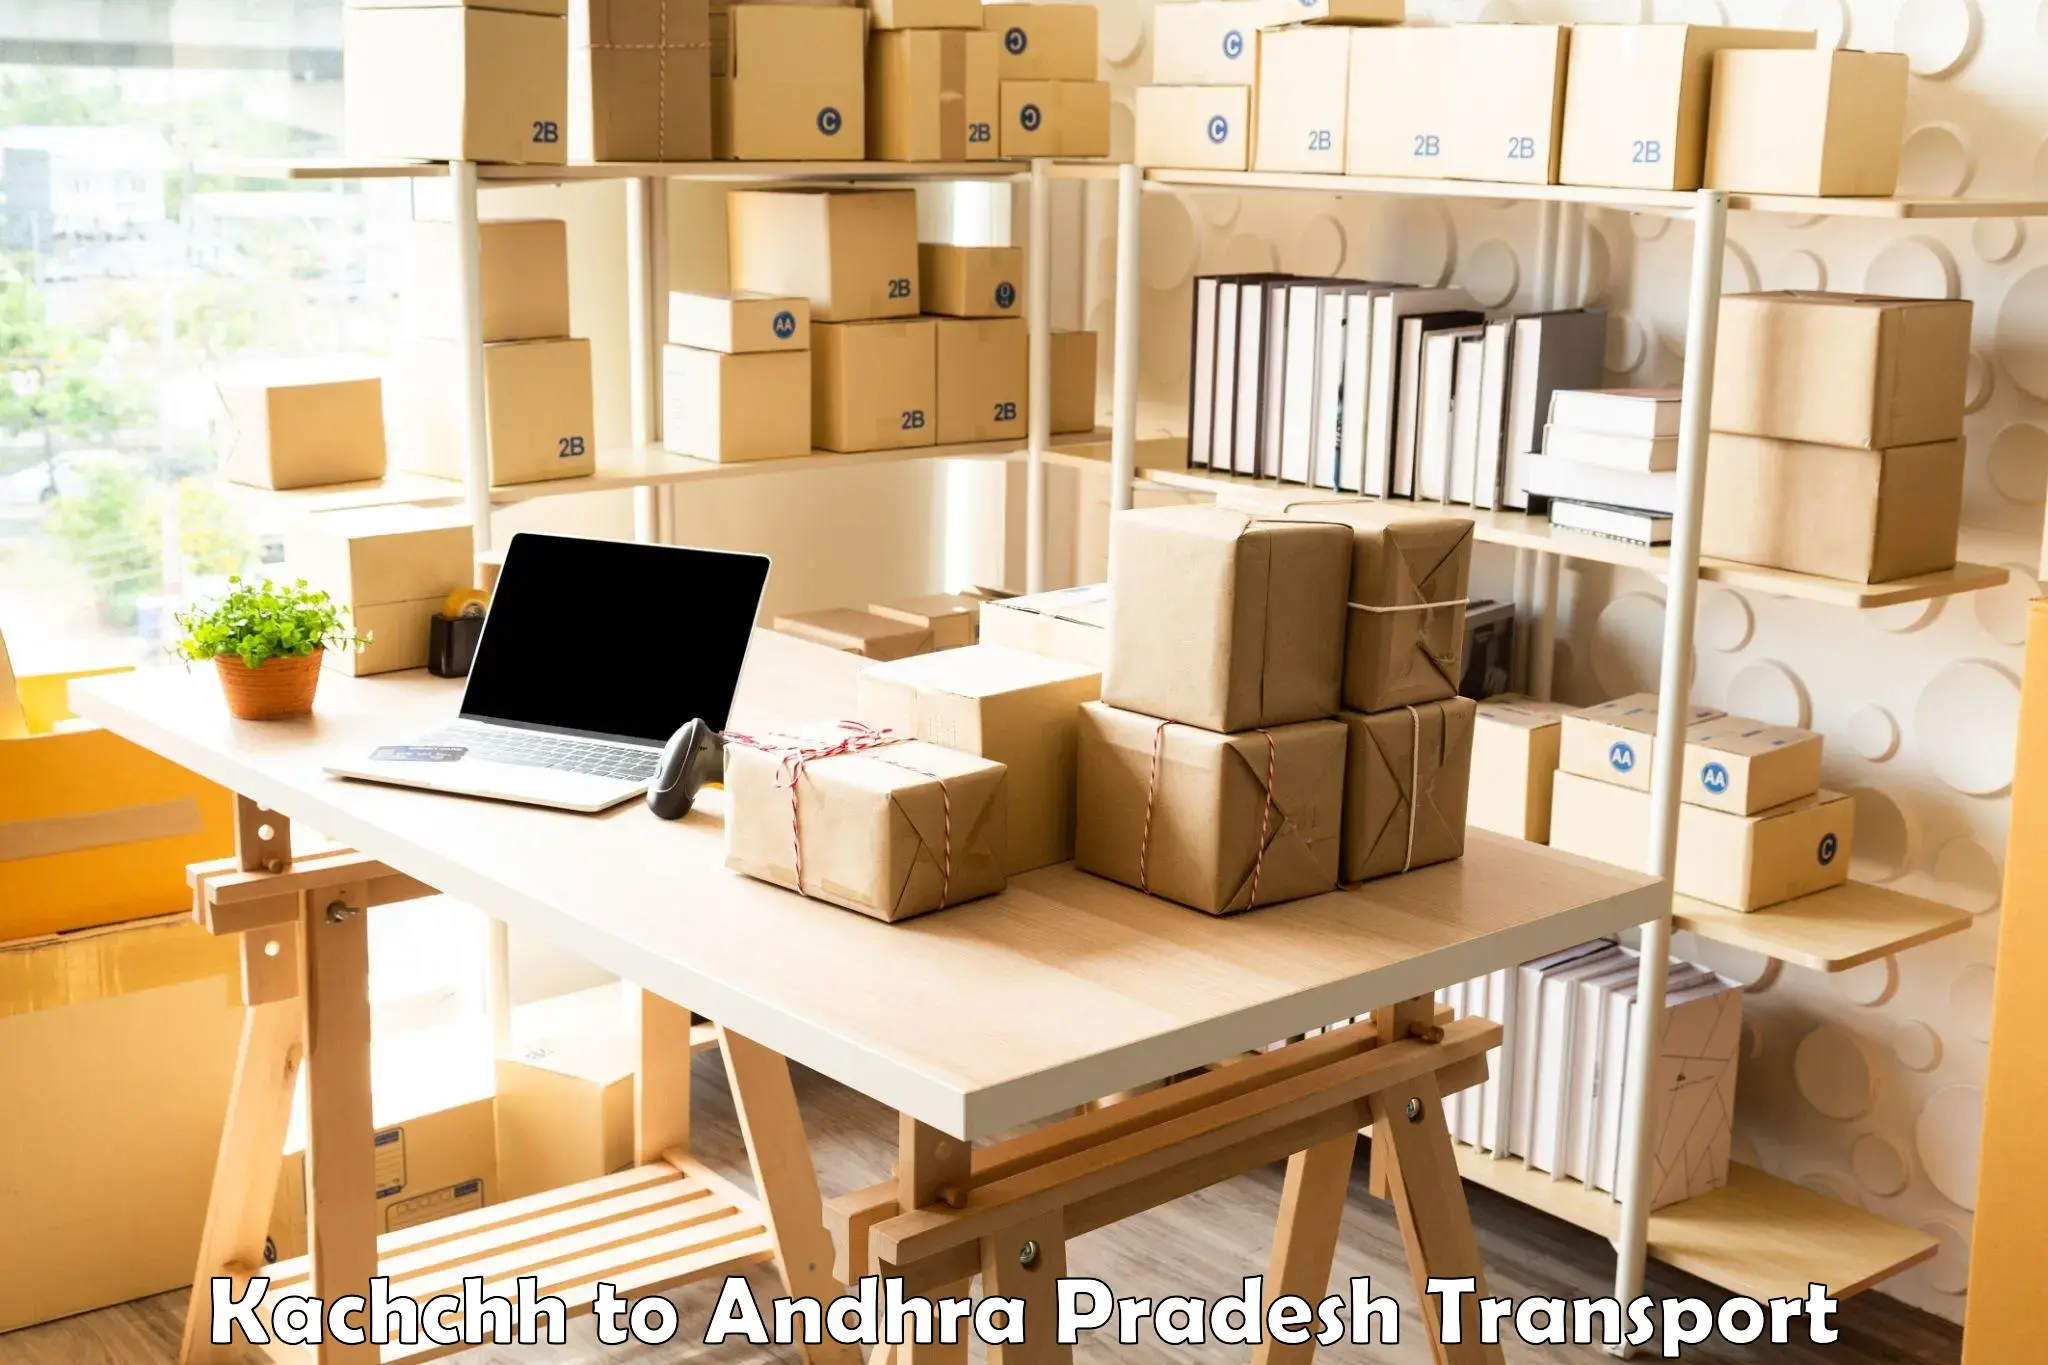 Truck transport companies in India Kachchh to Sri City